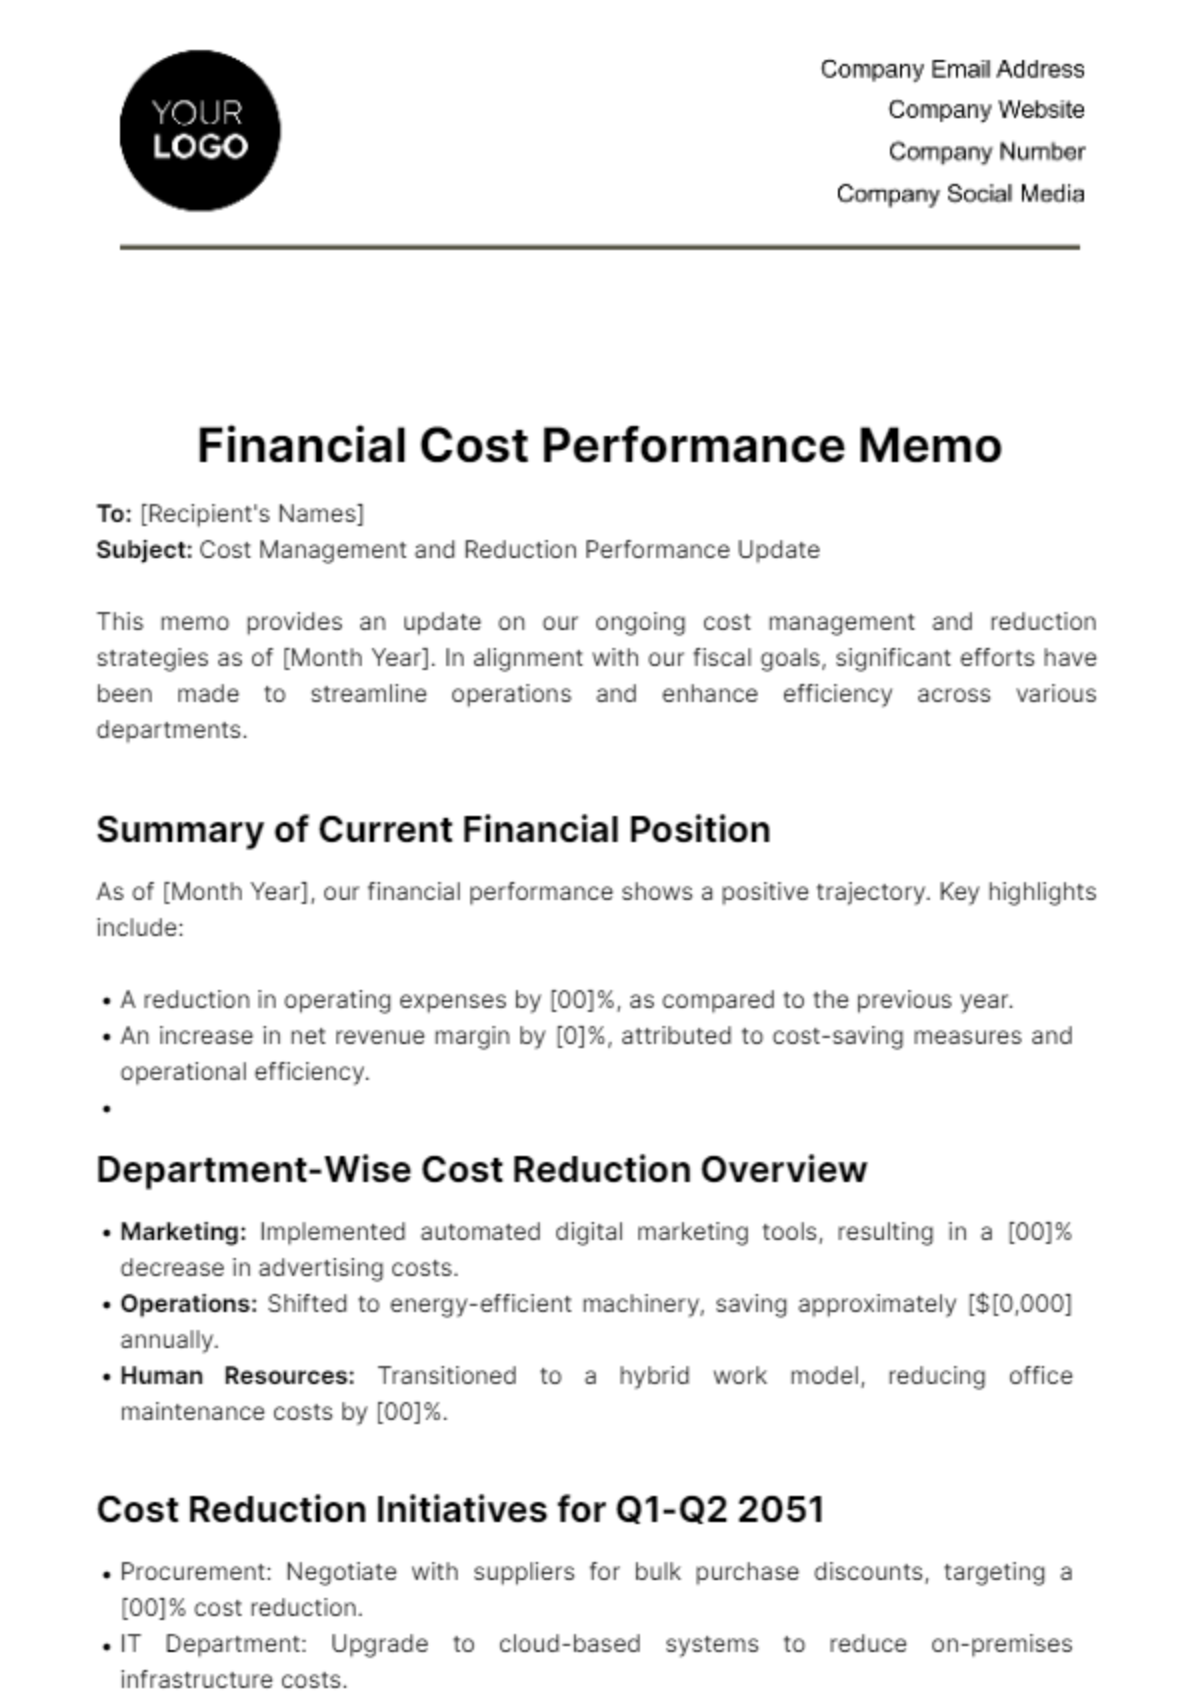 Financial Cost Performance Memo Template